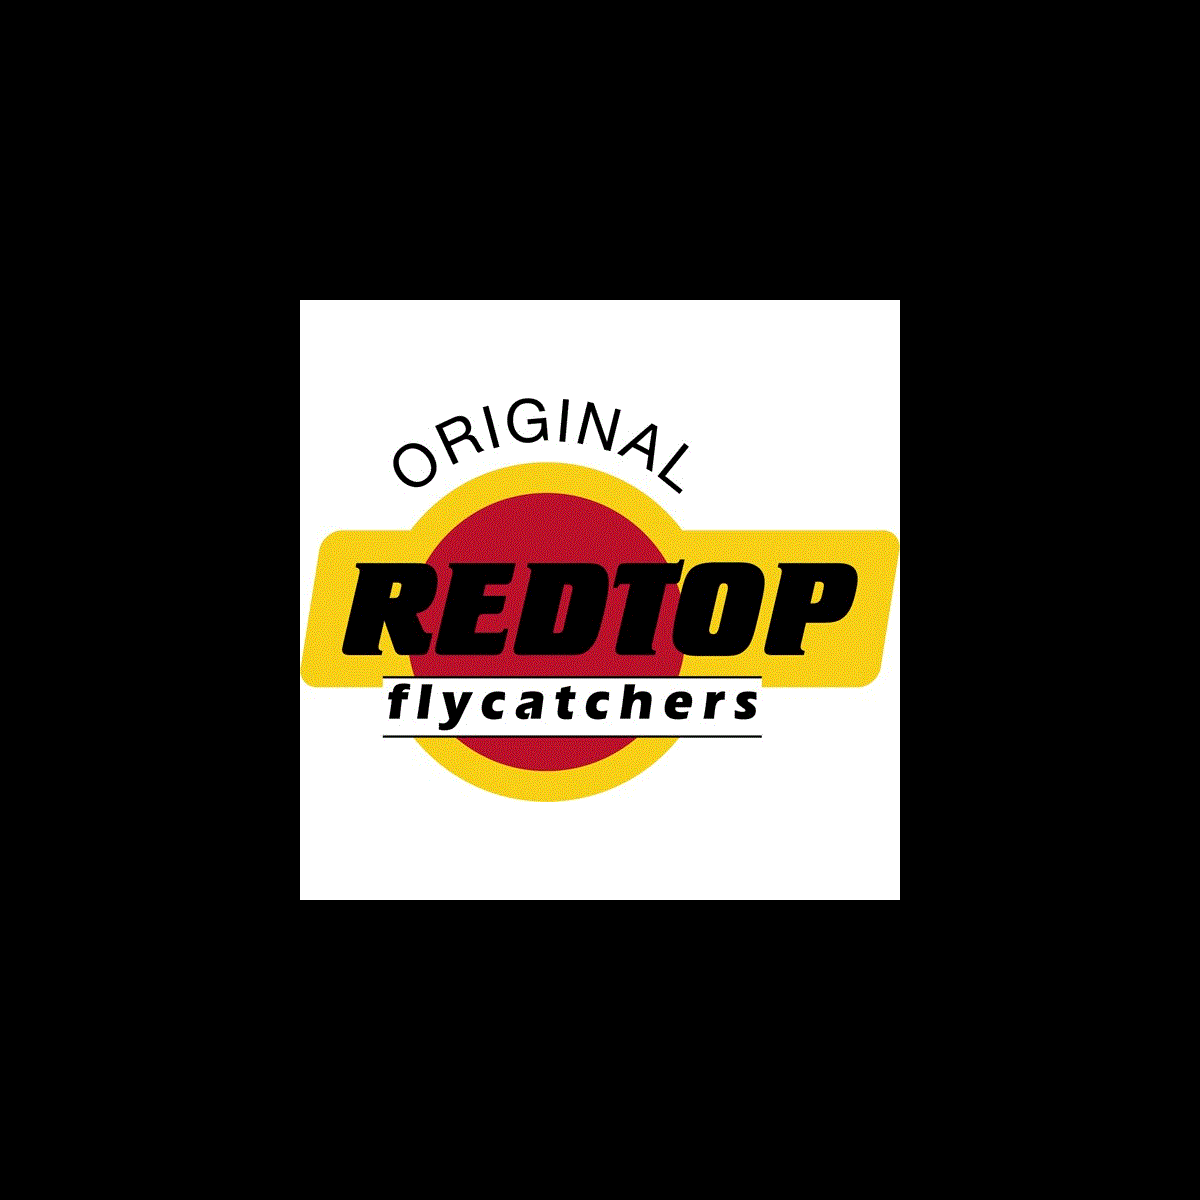 Where to Buy RedTop Fly Catchers